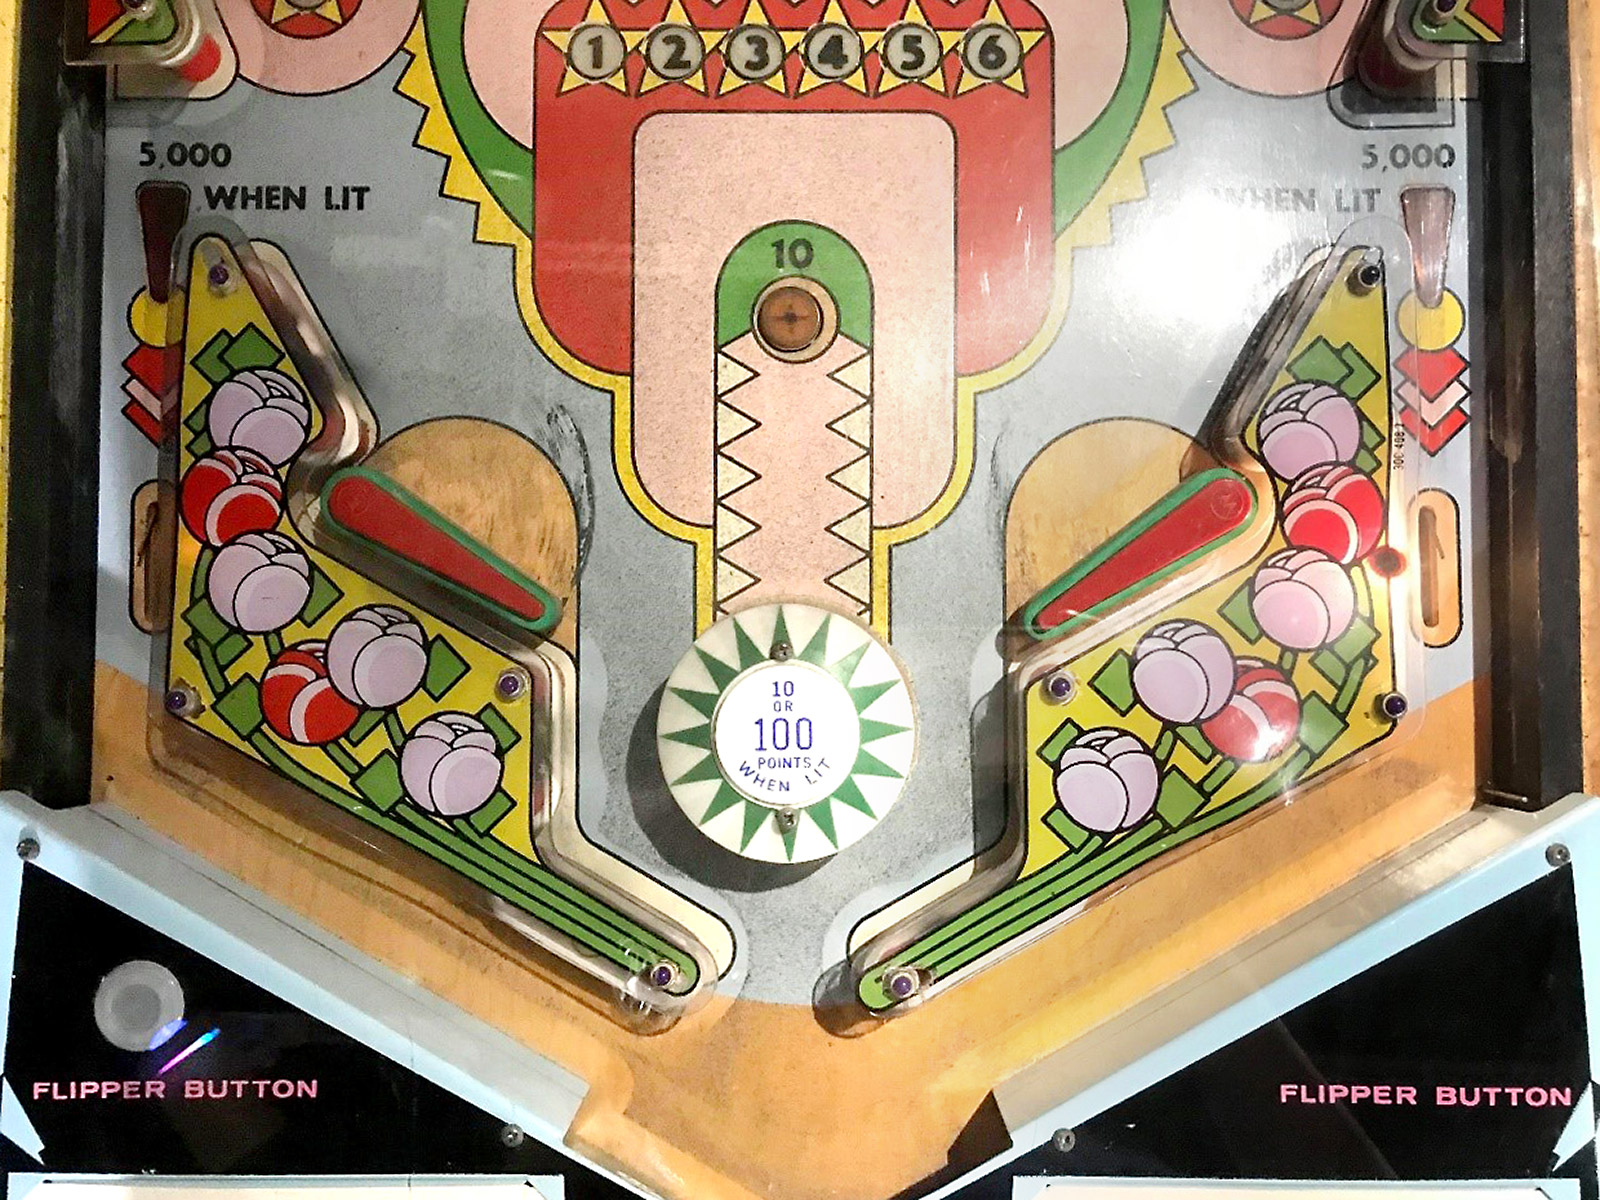 1969 Williams Miss O pinball rubber ring kit 1968 Williams Cue-T